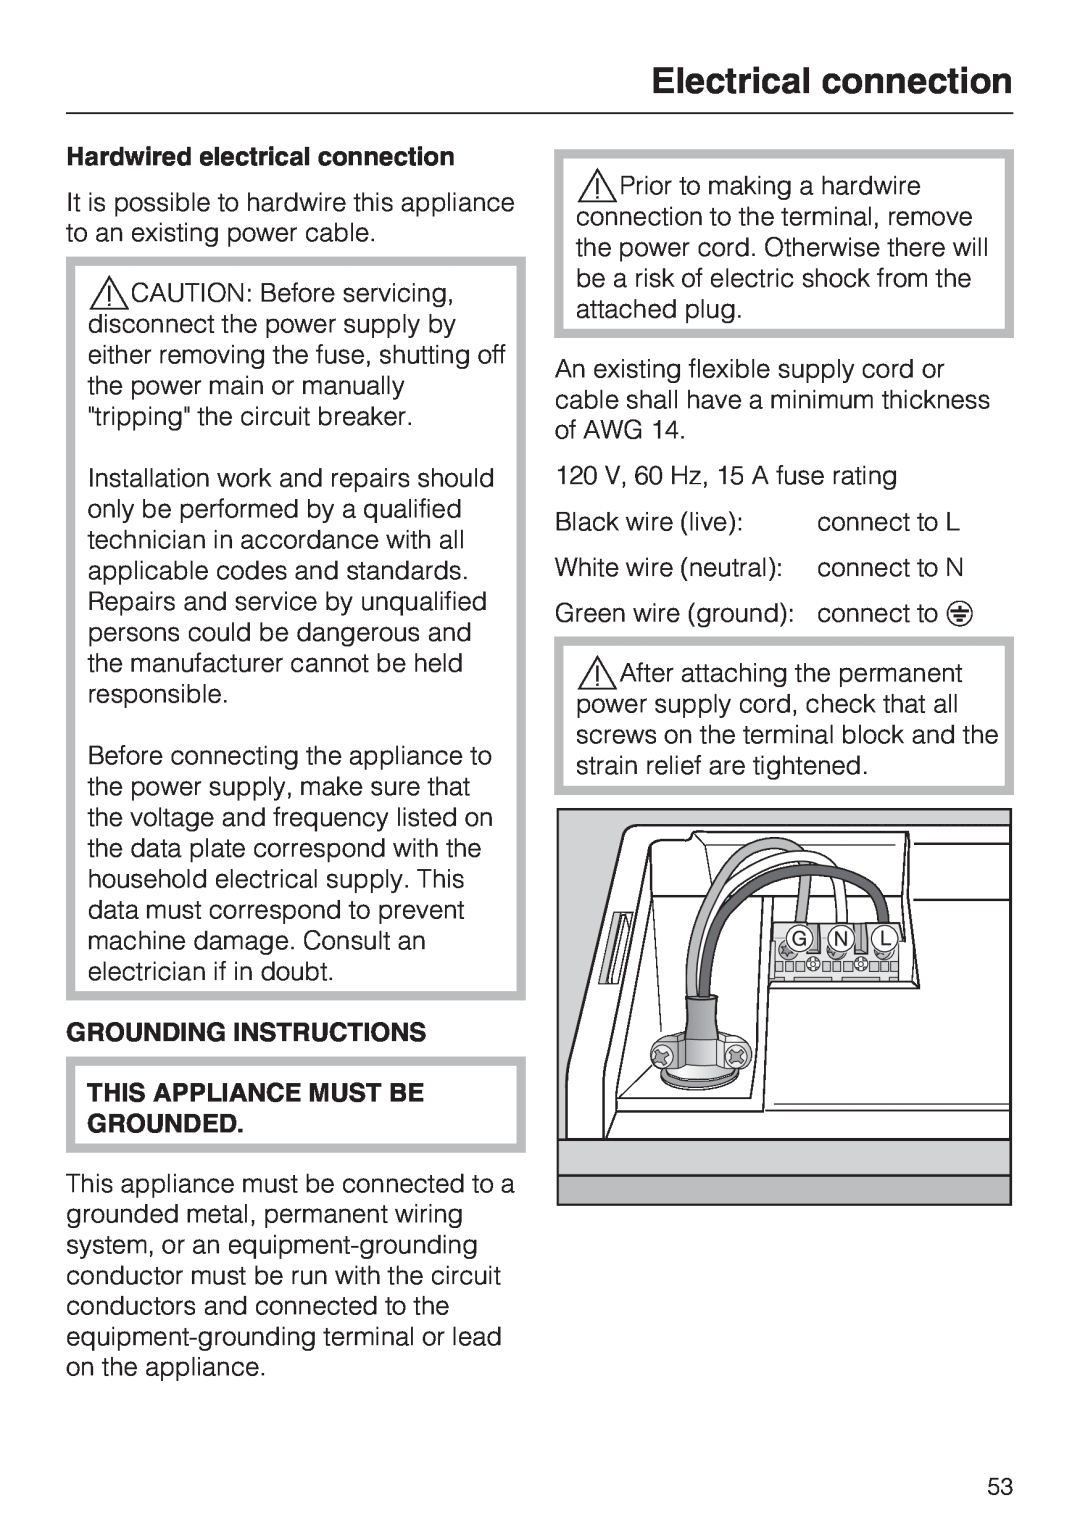 Miele G 4286, G 4281 manual Electrical connection, Hardwired electrical connection, Grounding Instructions 